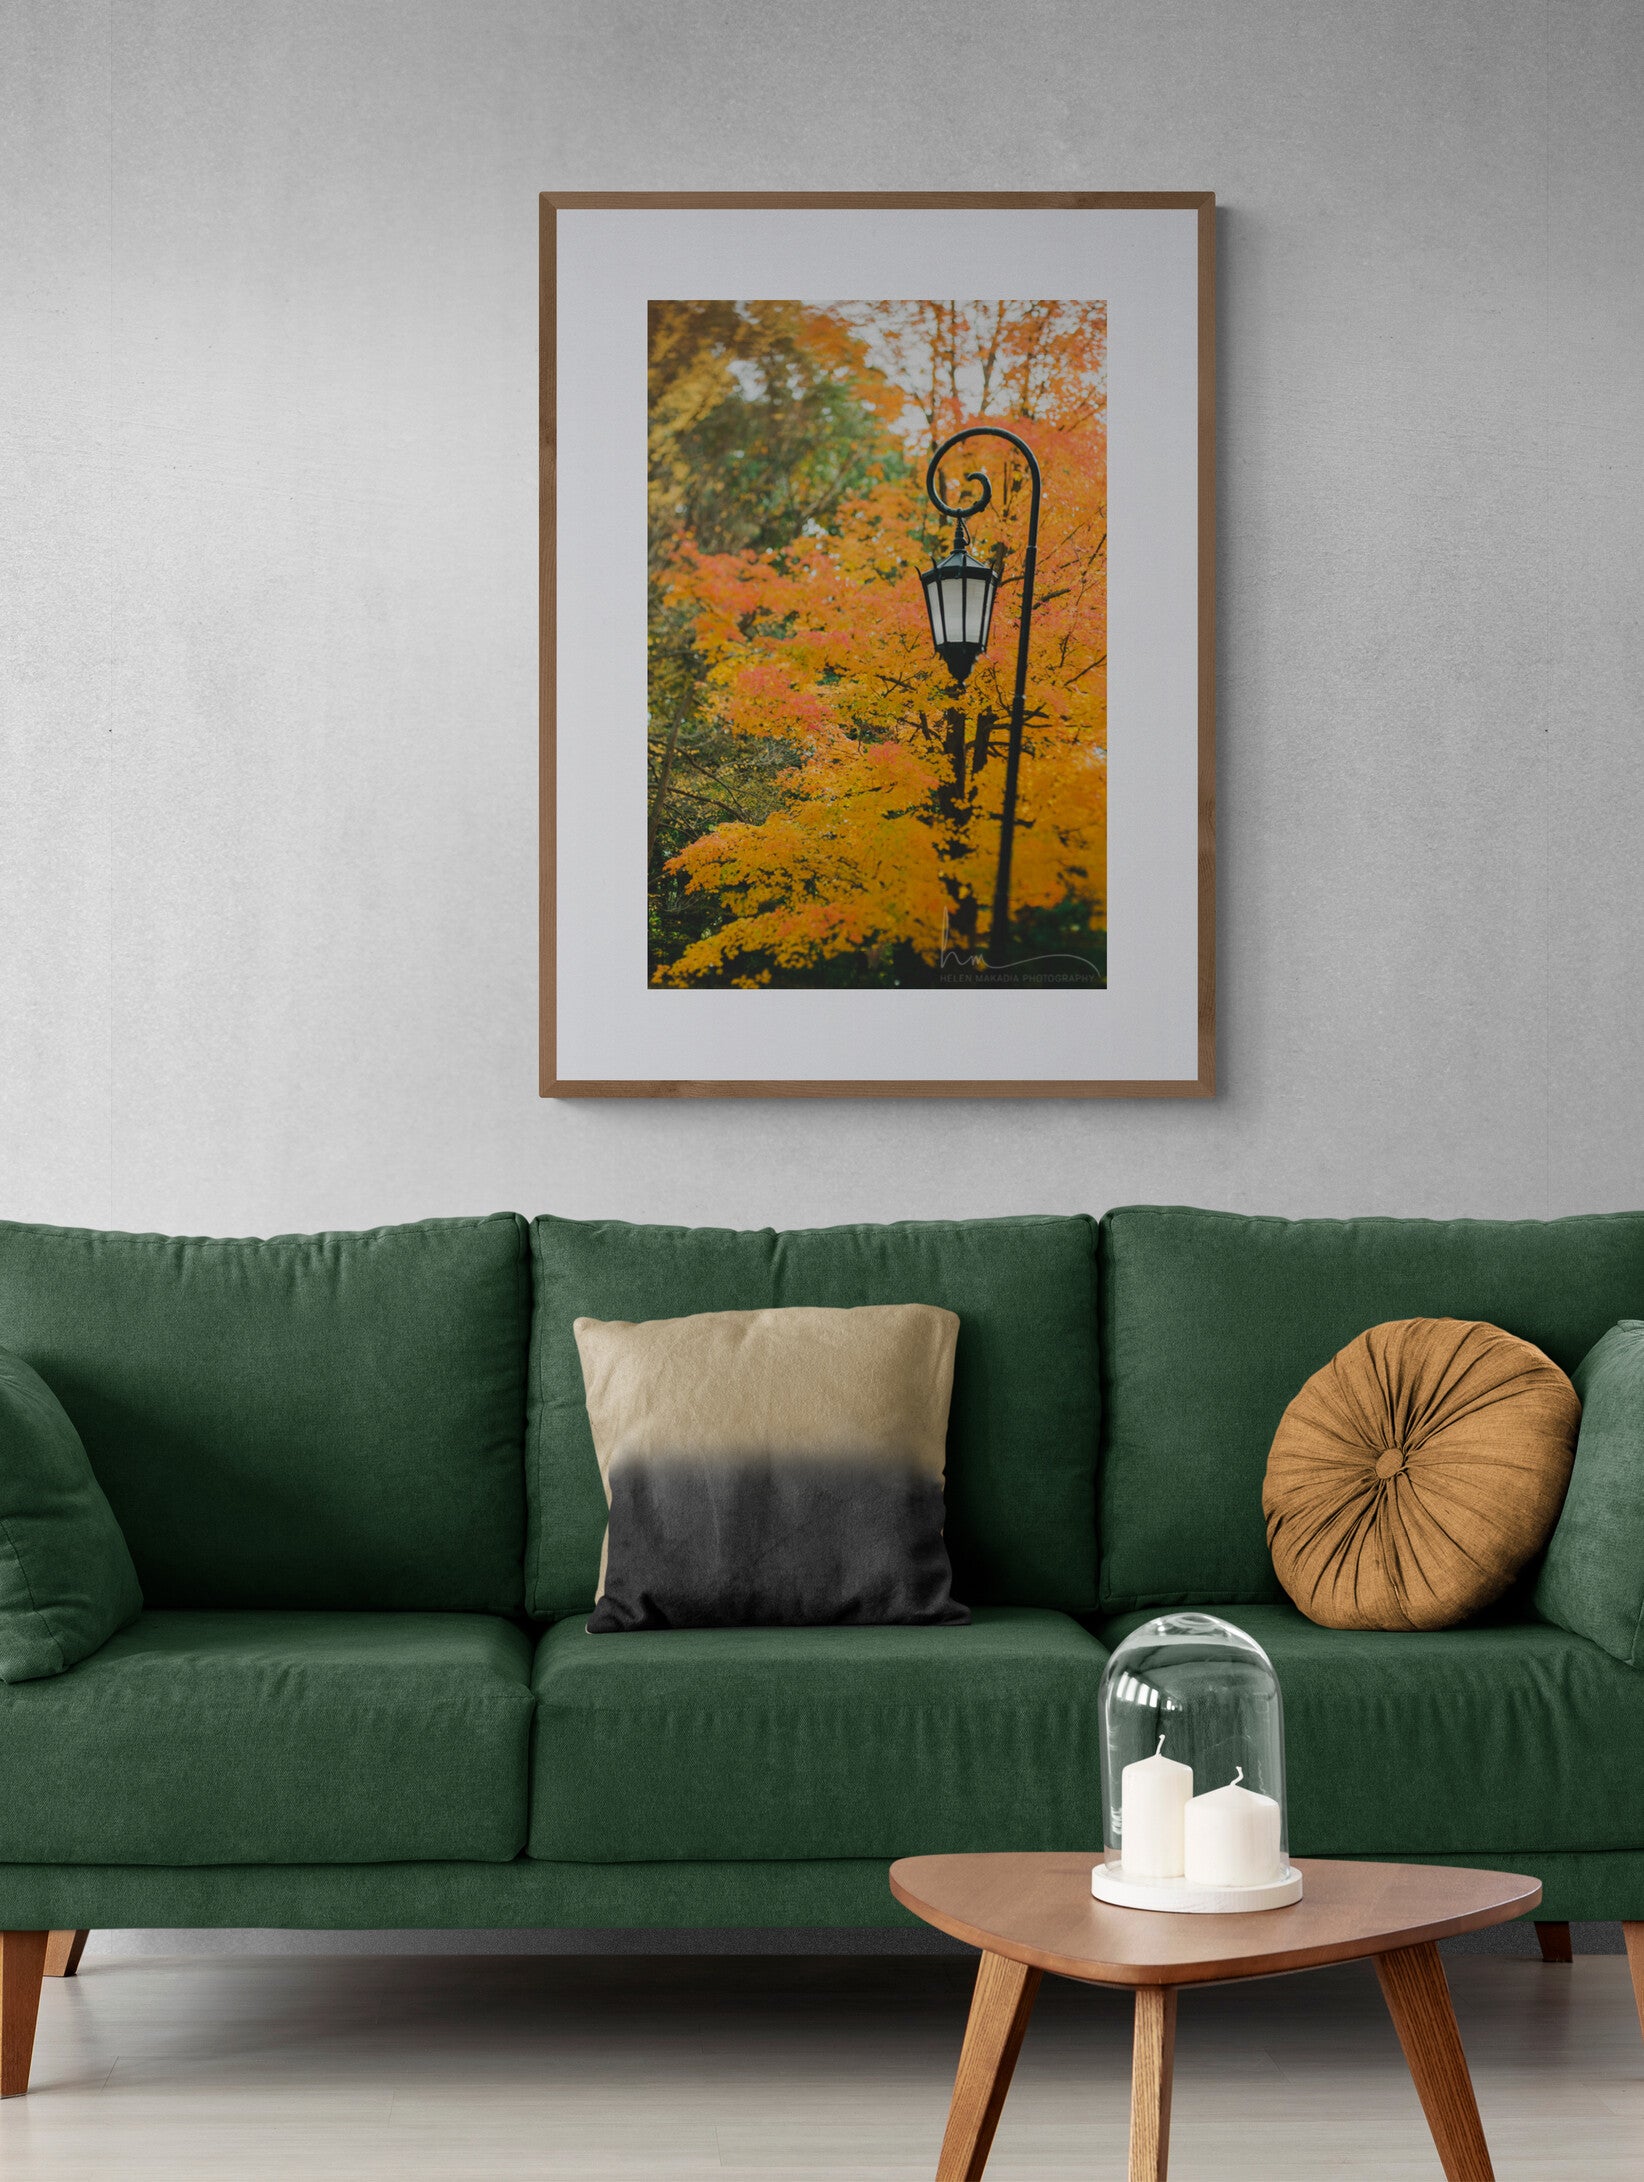 Wellesley lantern photograph wall art print in a living room